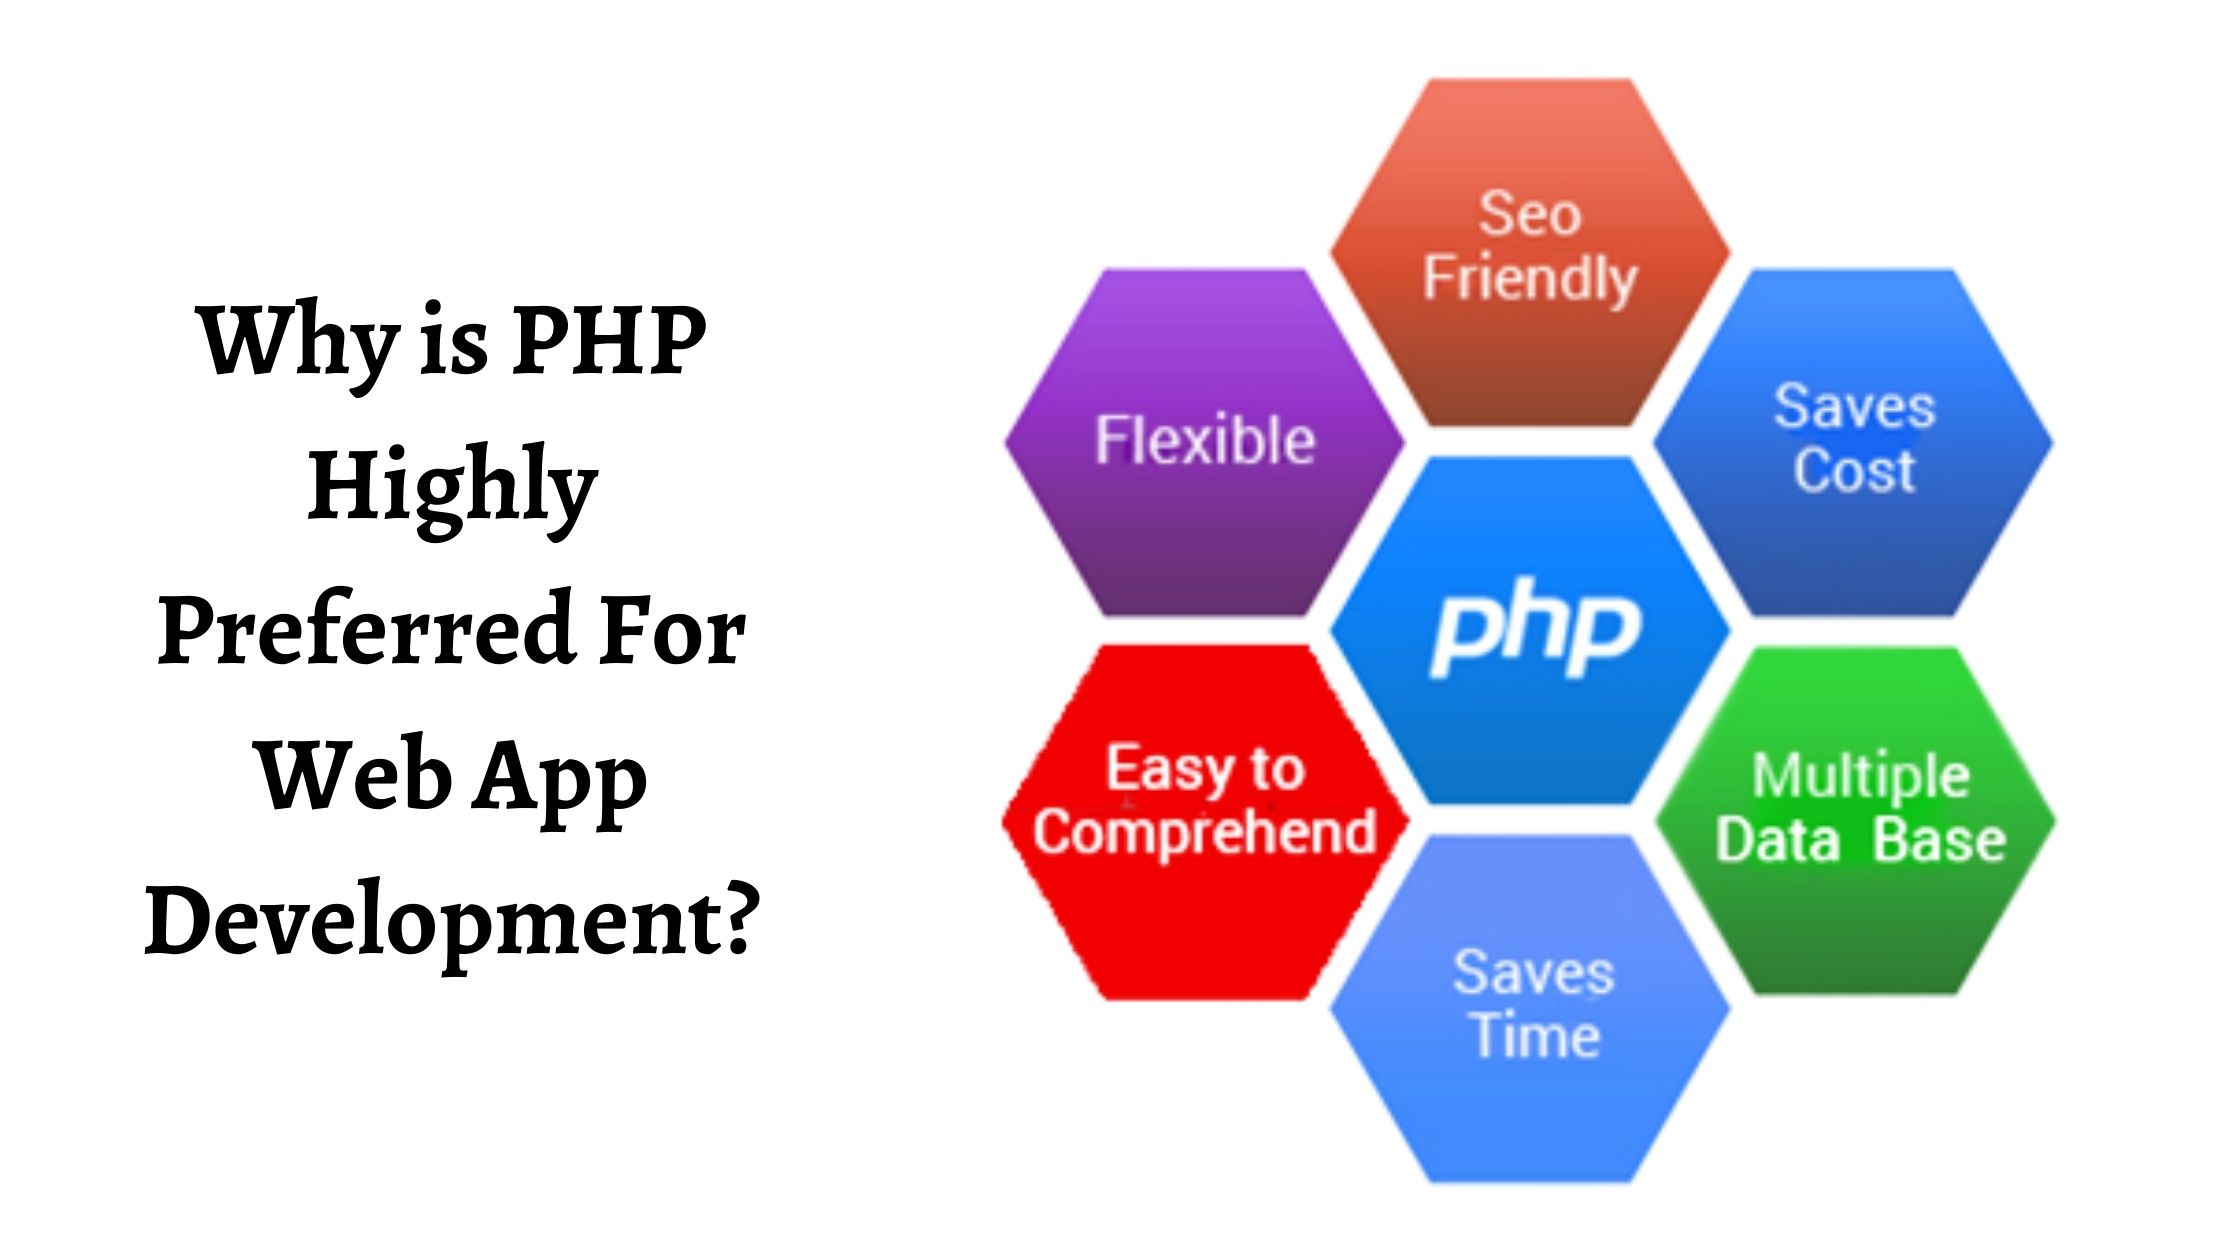 Why is PHP Highly Preferred For Web App Development